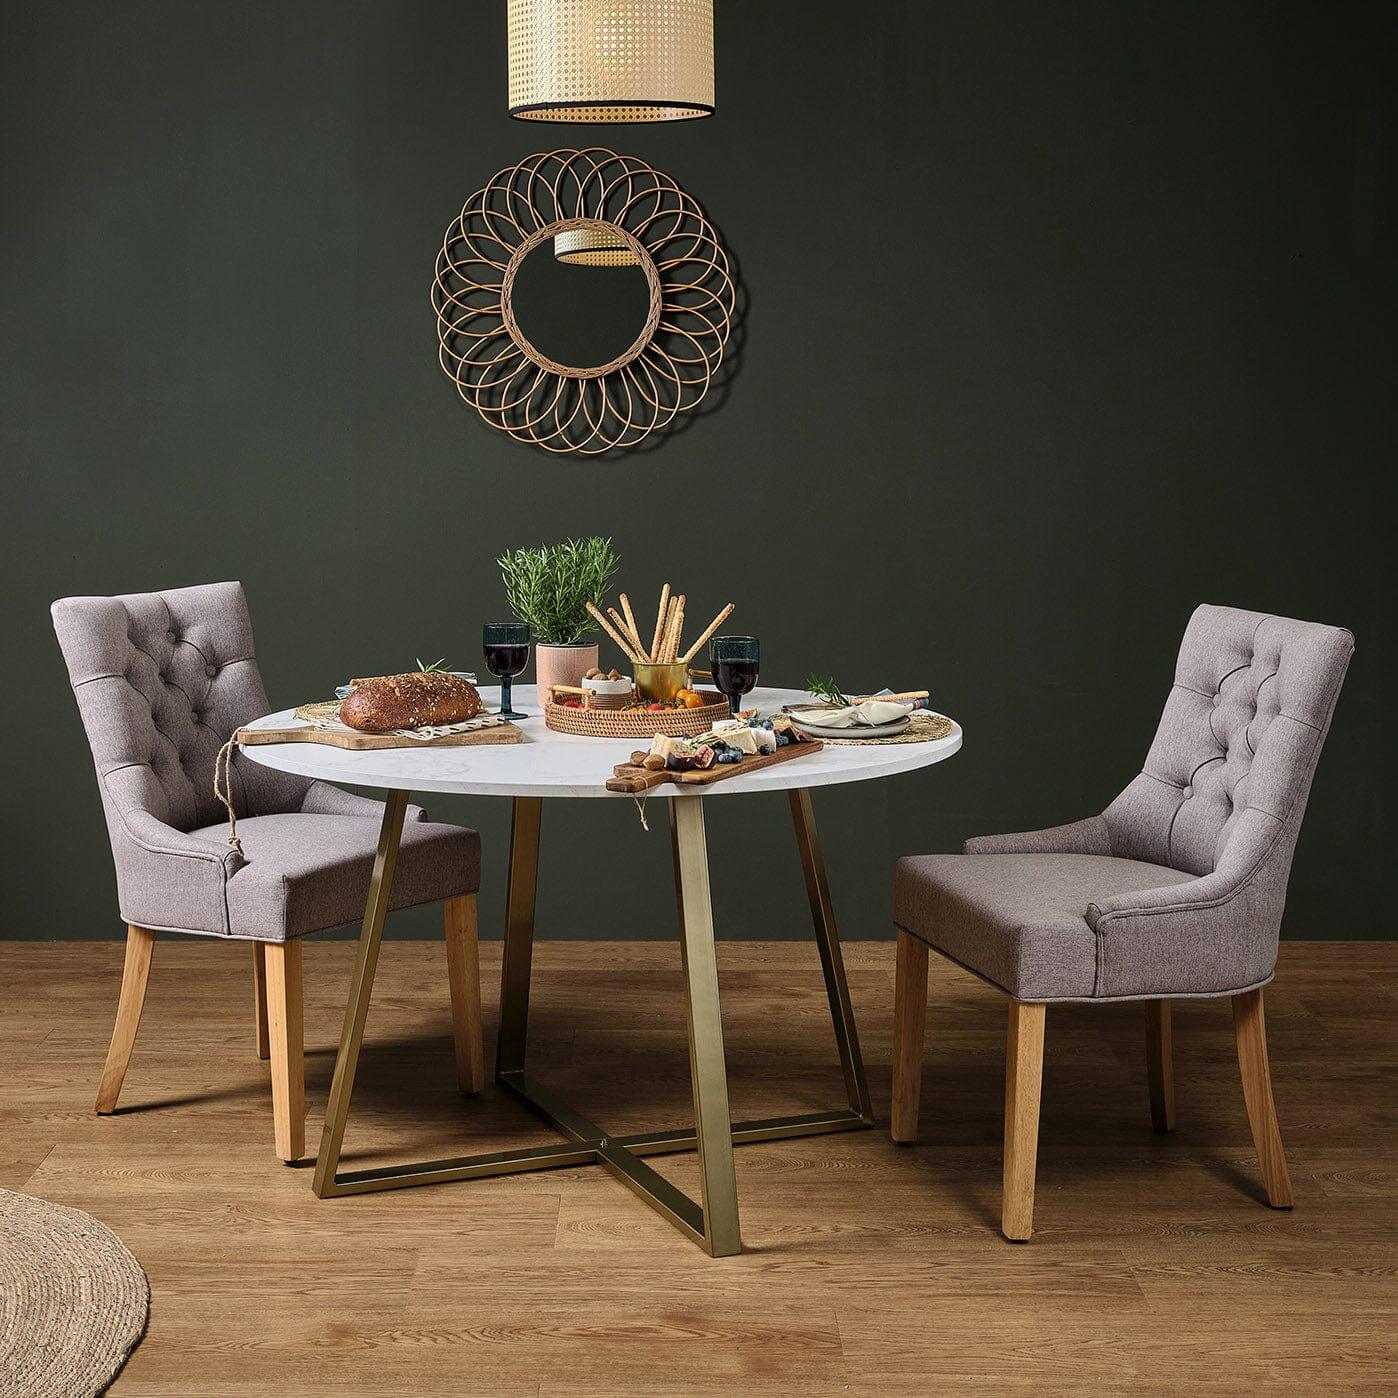 Louis dining chairs - set of 2 - grey and light wood - Laura James